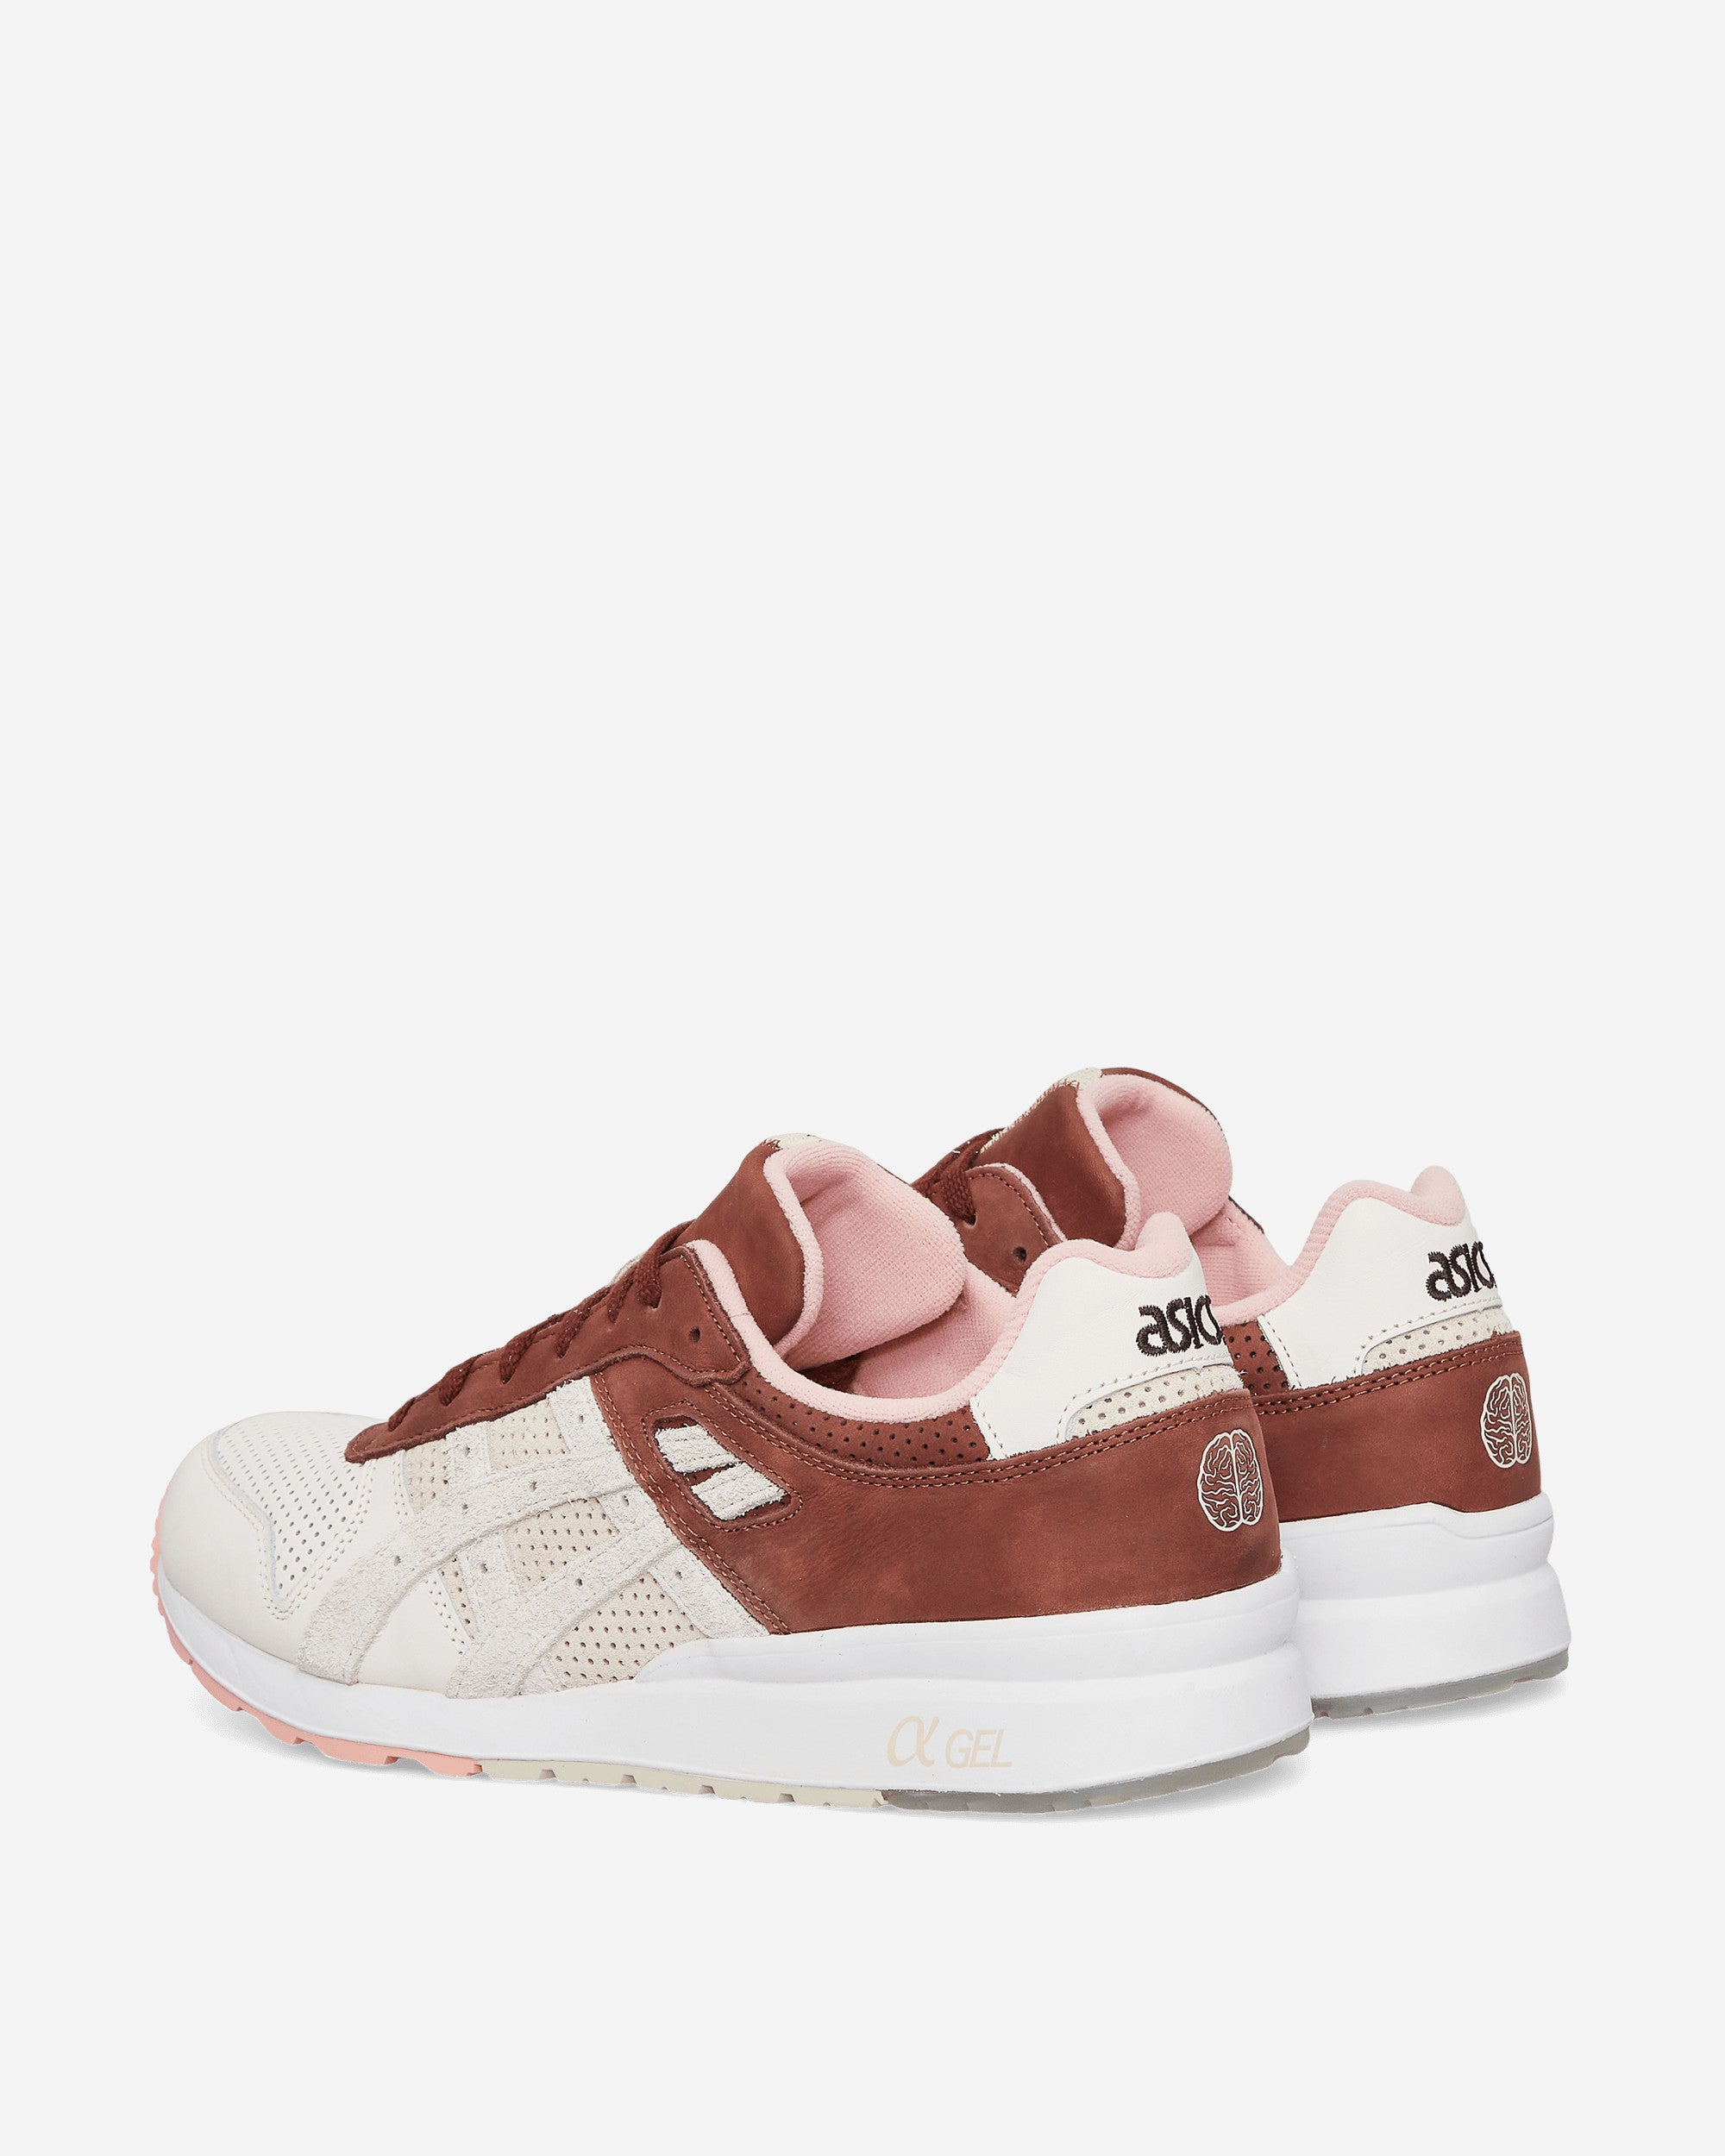 Asics Afew Gt-Ii Blush/Chocolate Brown Sneakers Low 1201A480-700